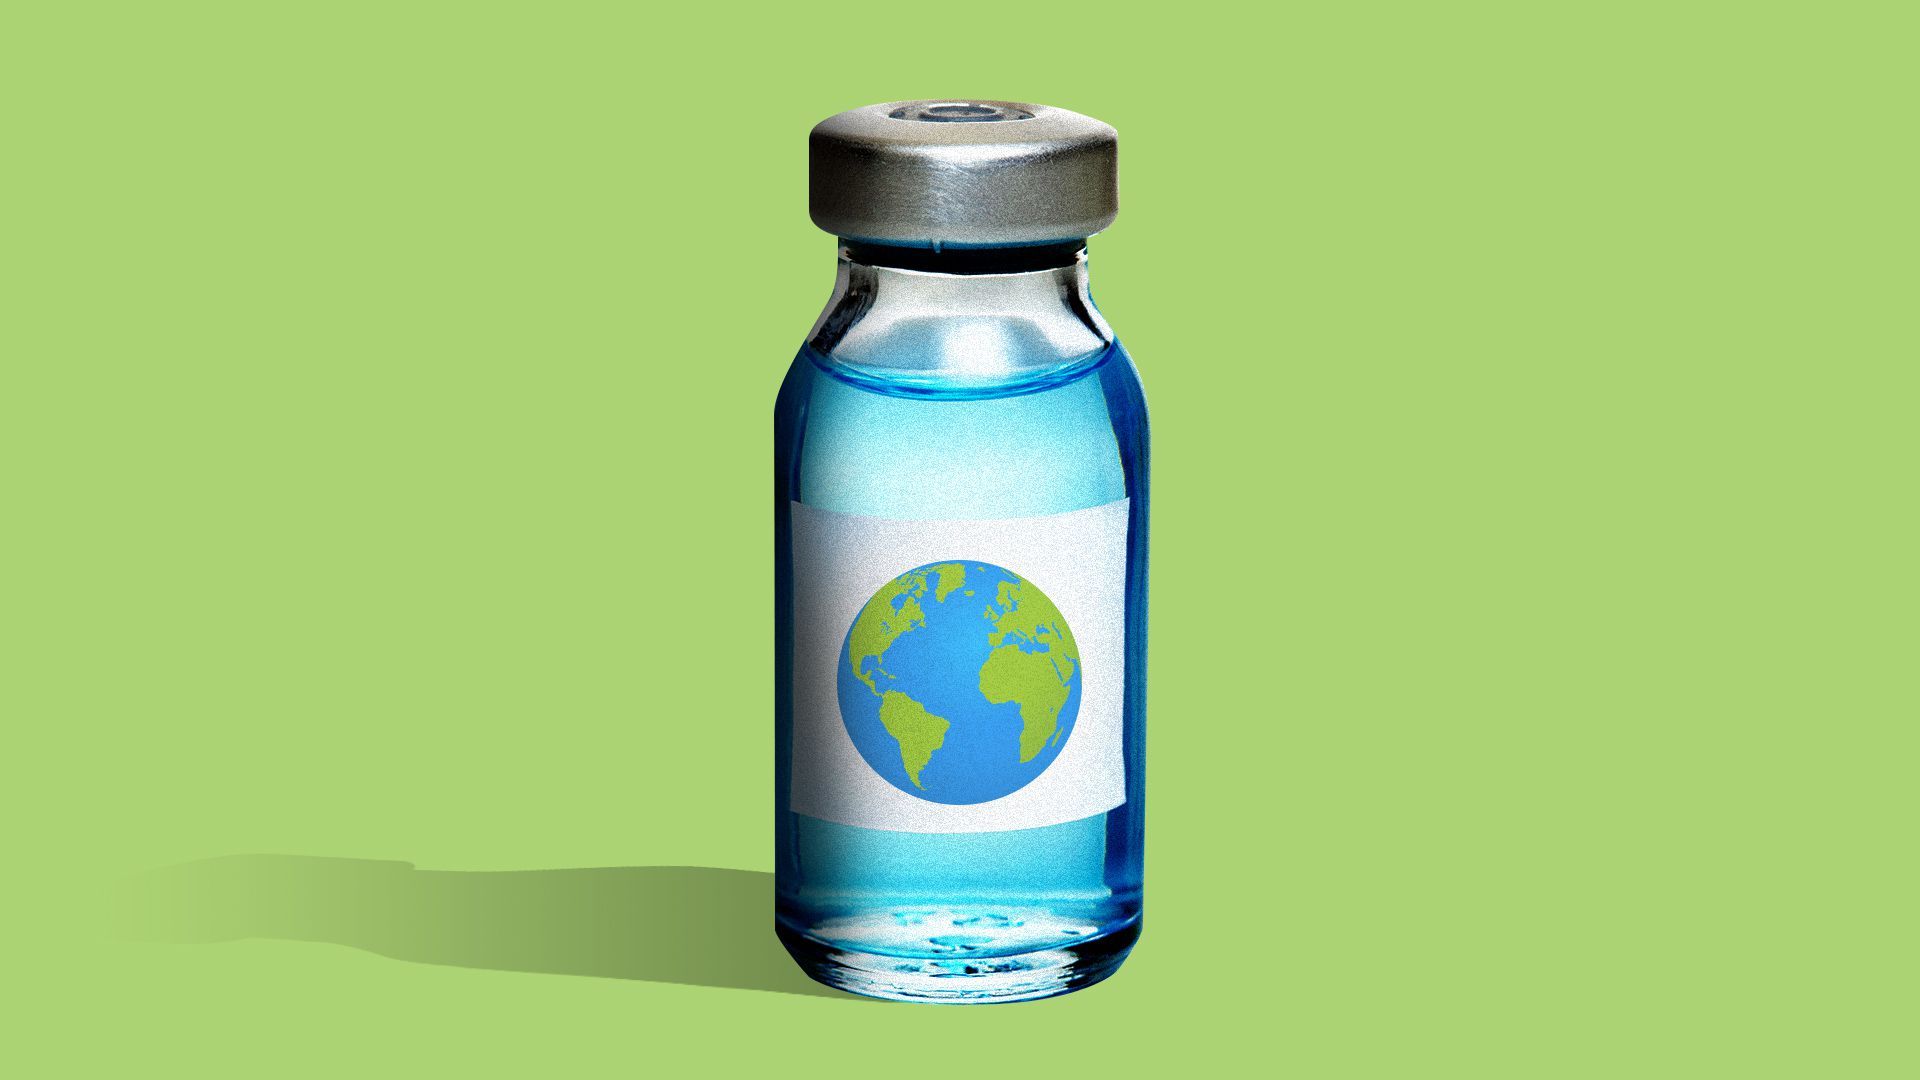 Illustration of a vaccine bottle with a picture of the Earth on its label. 